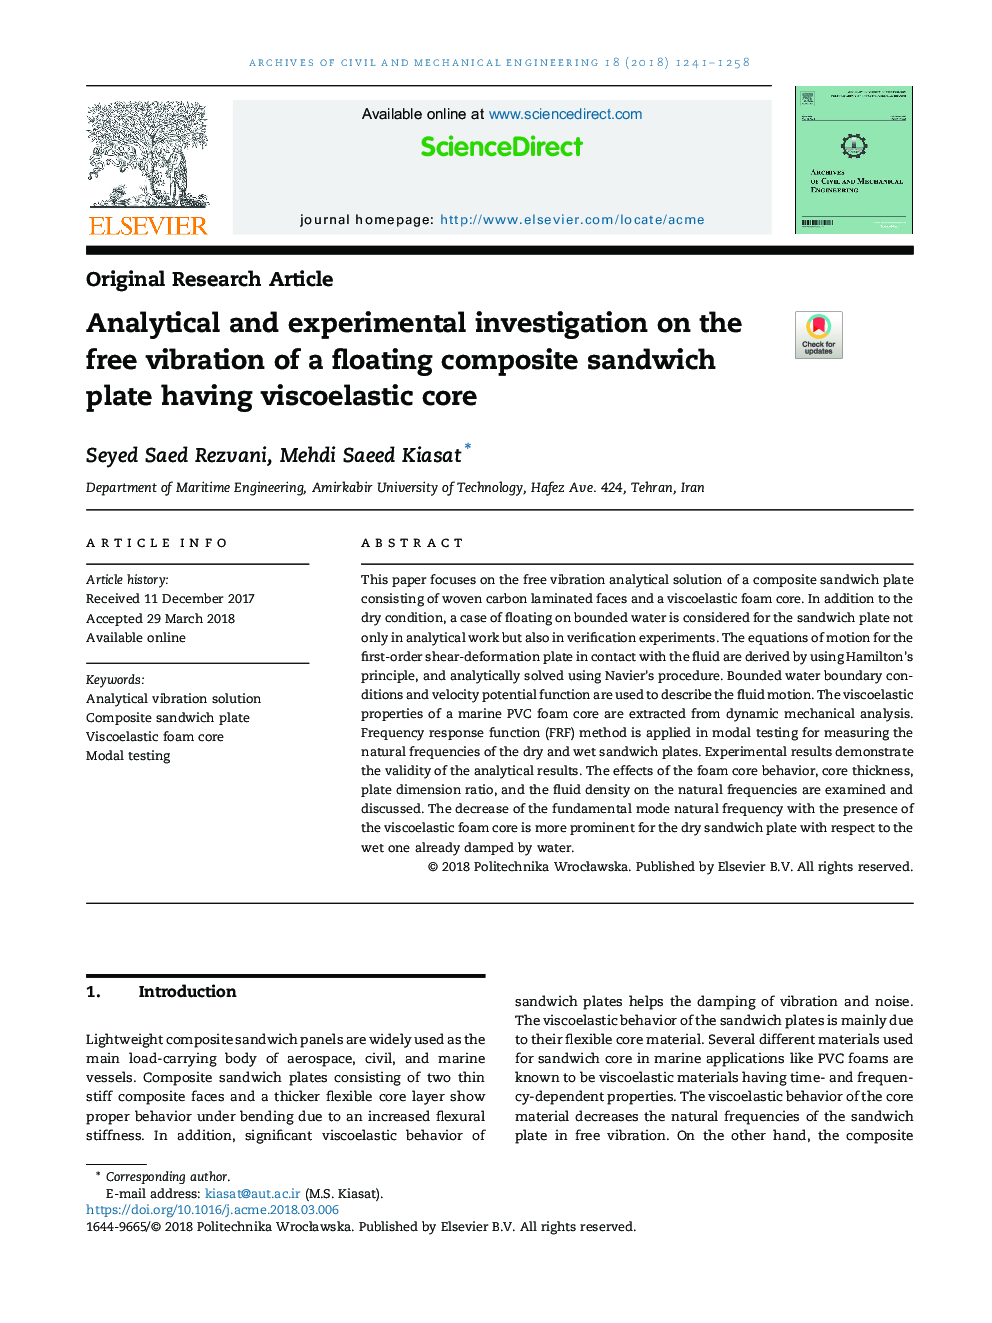 Analytical and experimental investigation on the free vibration of a floating composite sandwich plate having viscoelastic core